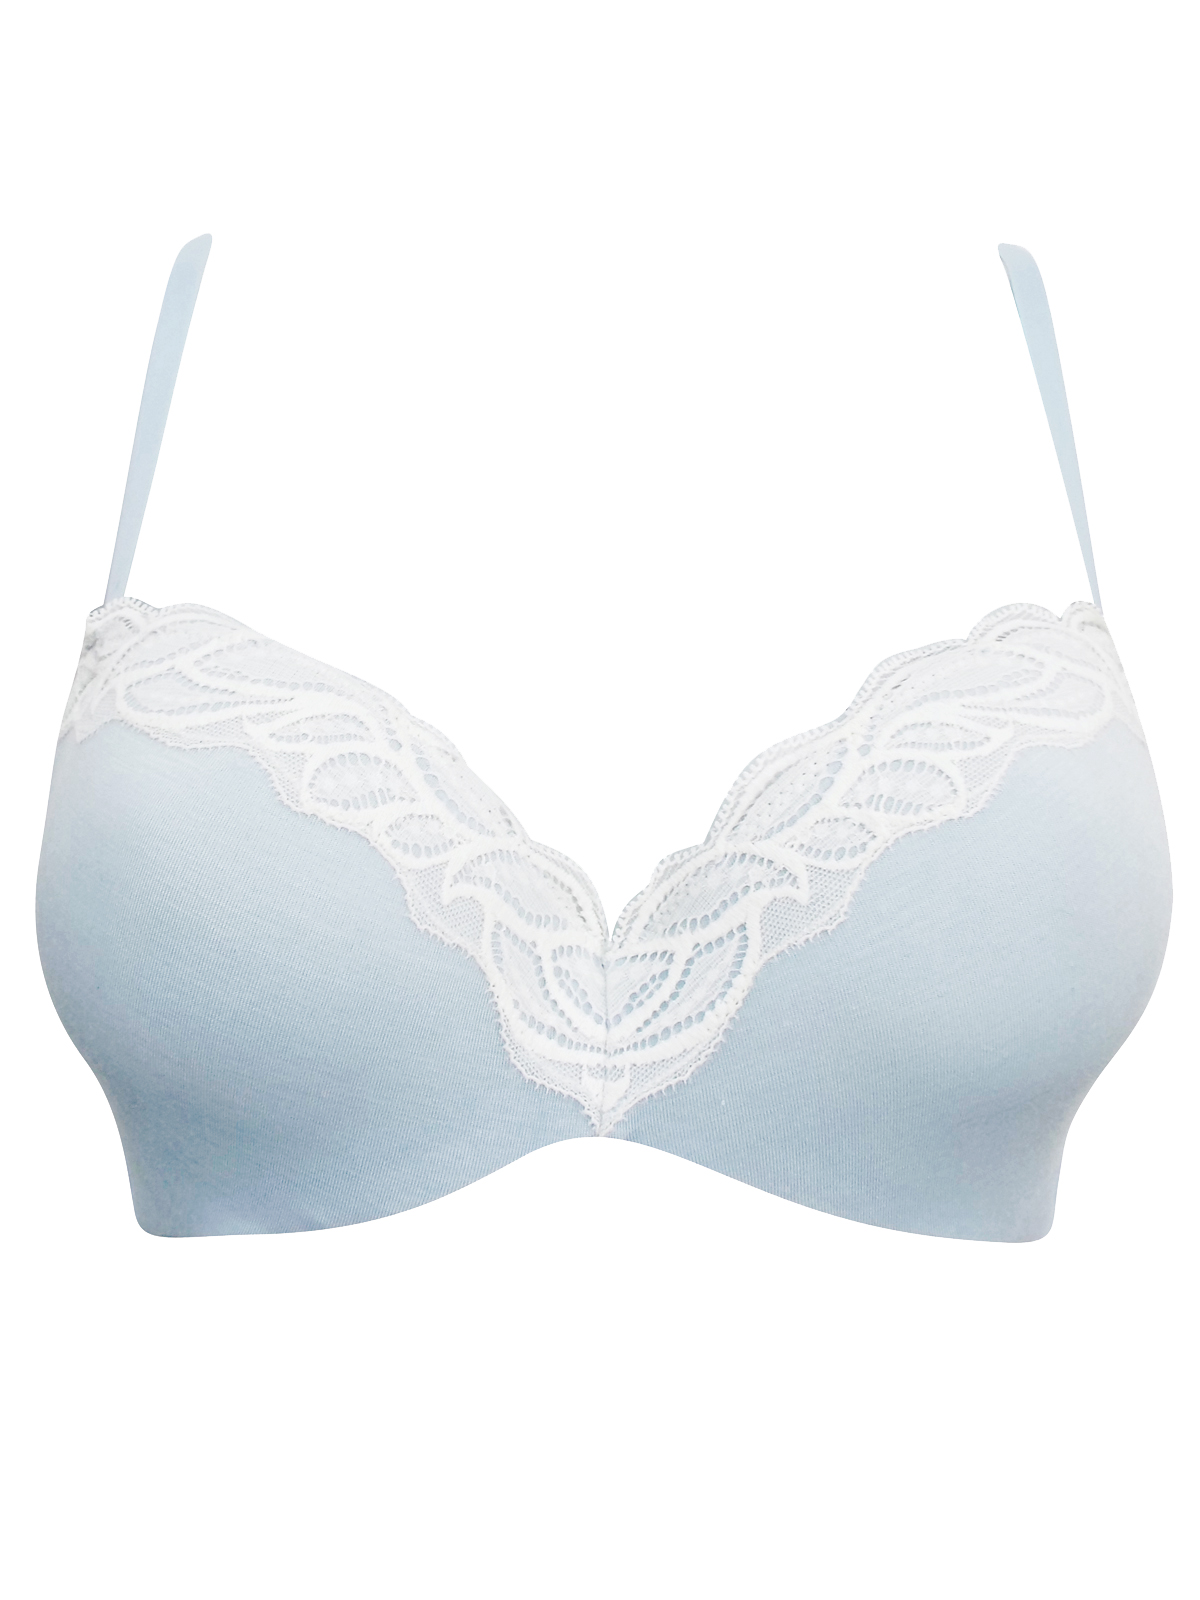 Wholesale Lingerie Spanish Brand Oysho - - OYSHO LIGHT-BLUE Lace Trim  Smoothing Moulded Full Cup Bra - Size 34 (B cup)